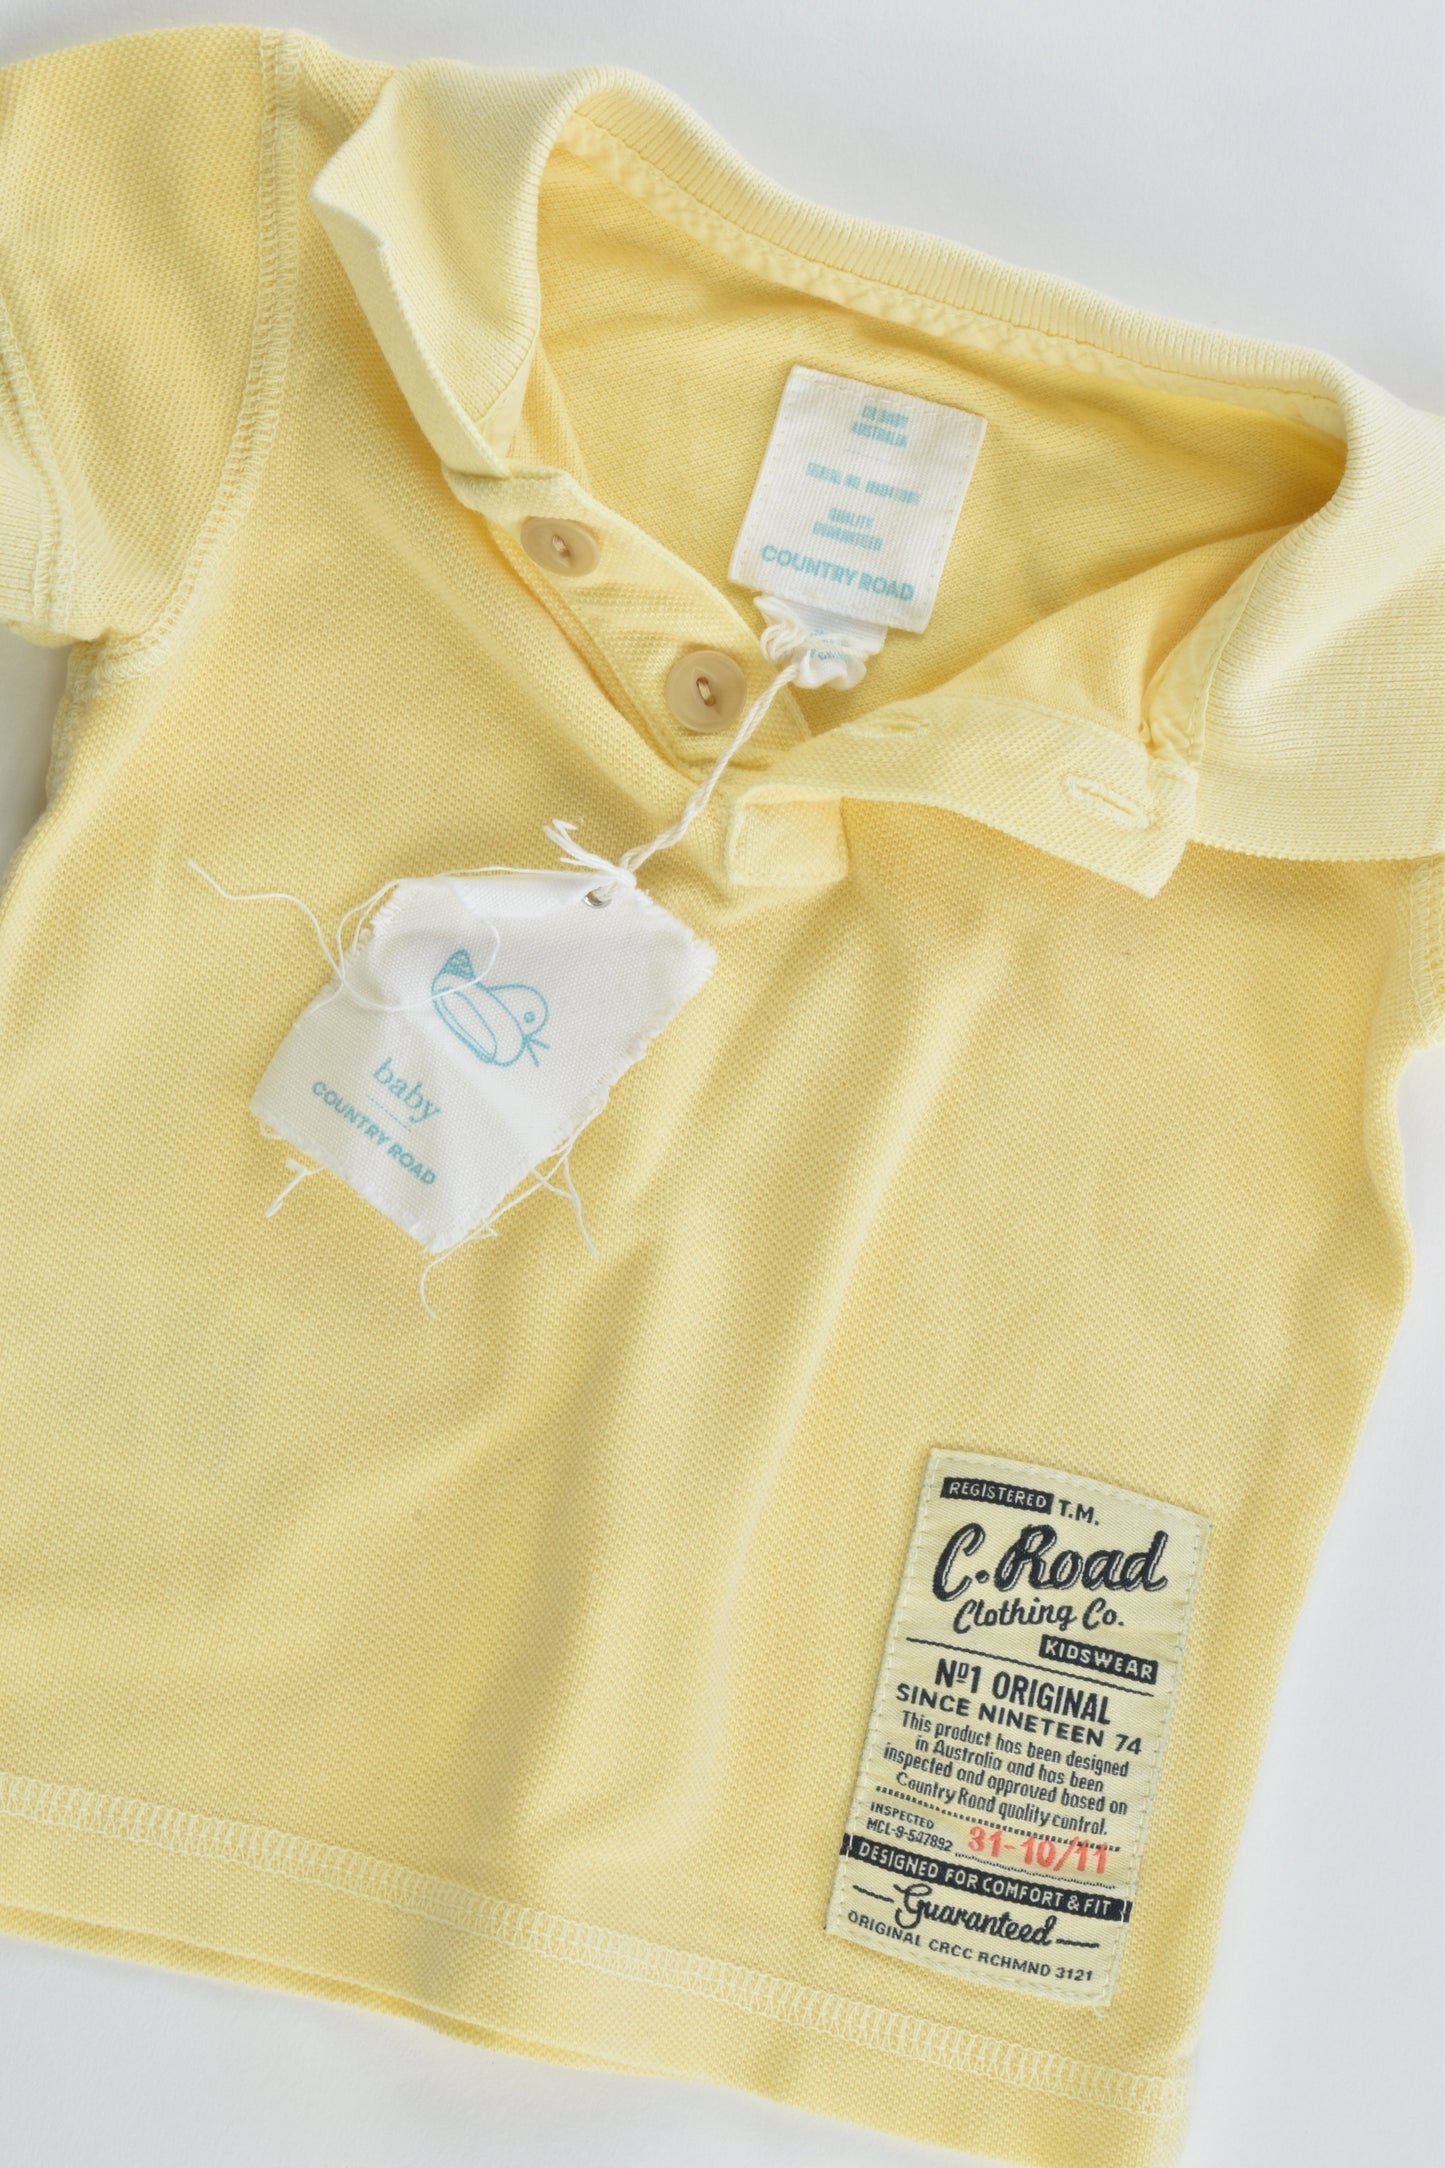 NEW Country Road Size 00 (3-6 months) Collared T-shirt